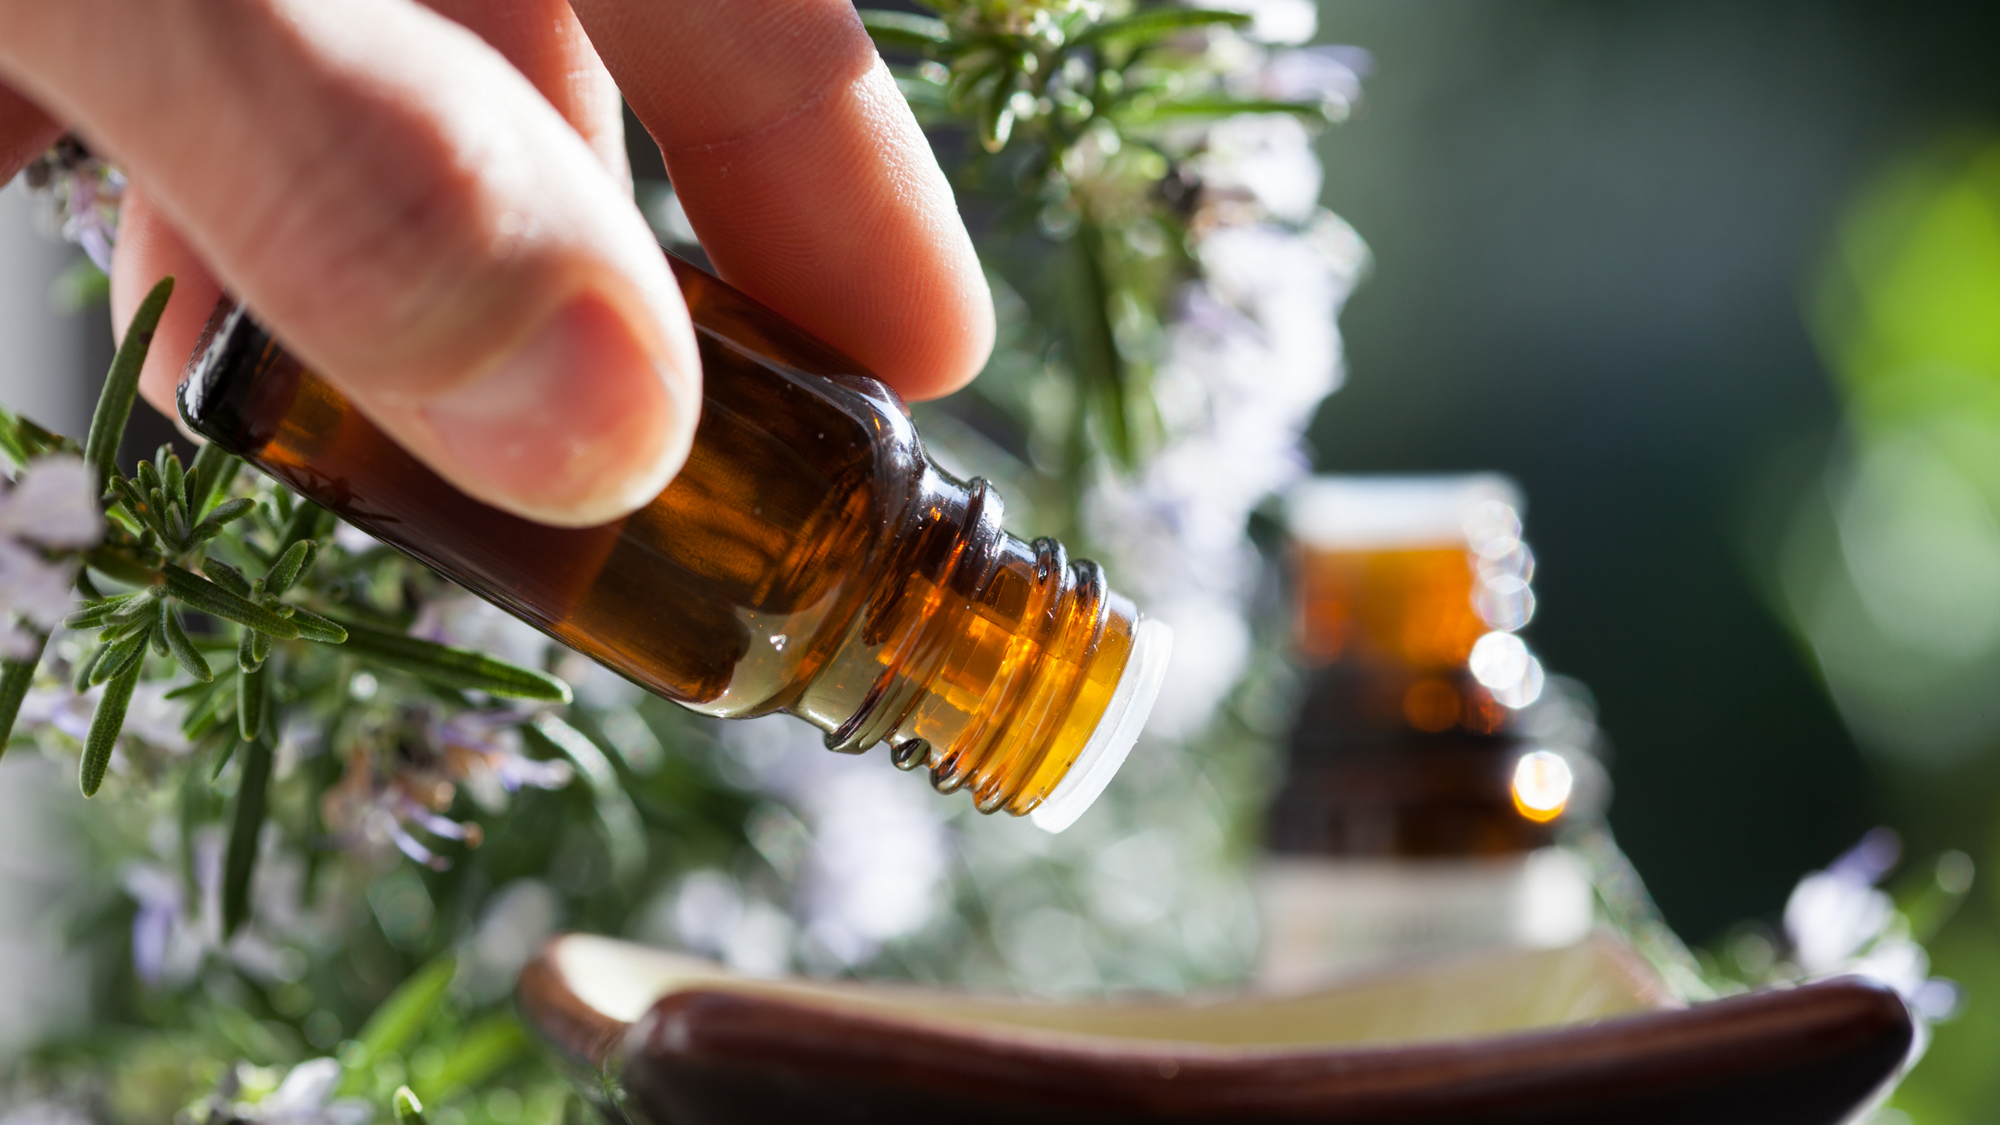 6 Surprising Benefits of Essential Oil Use